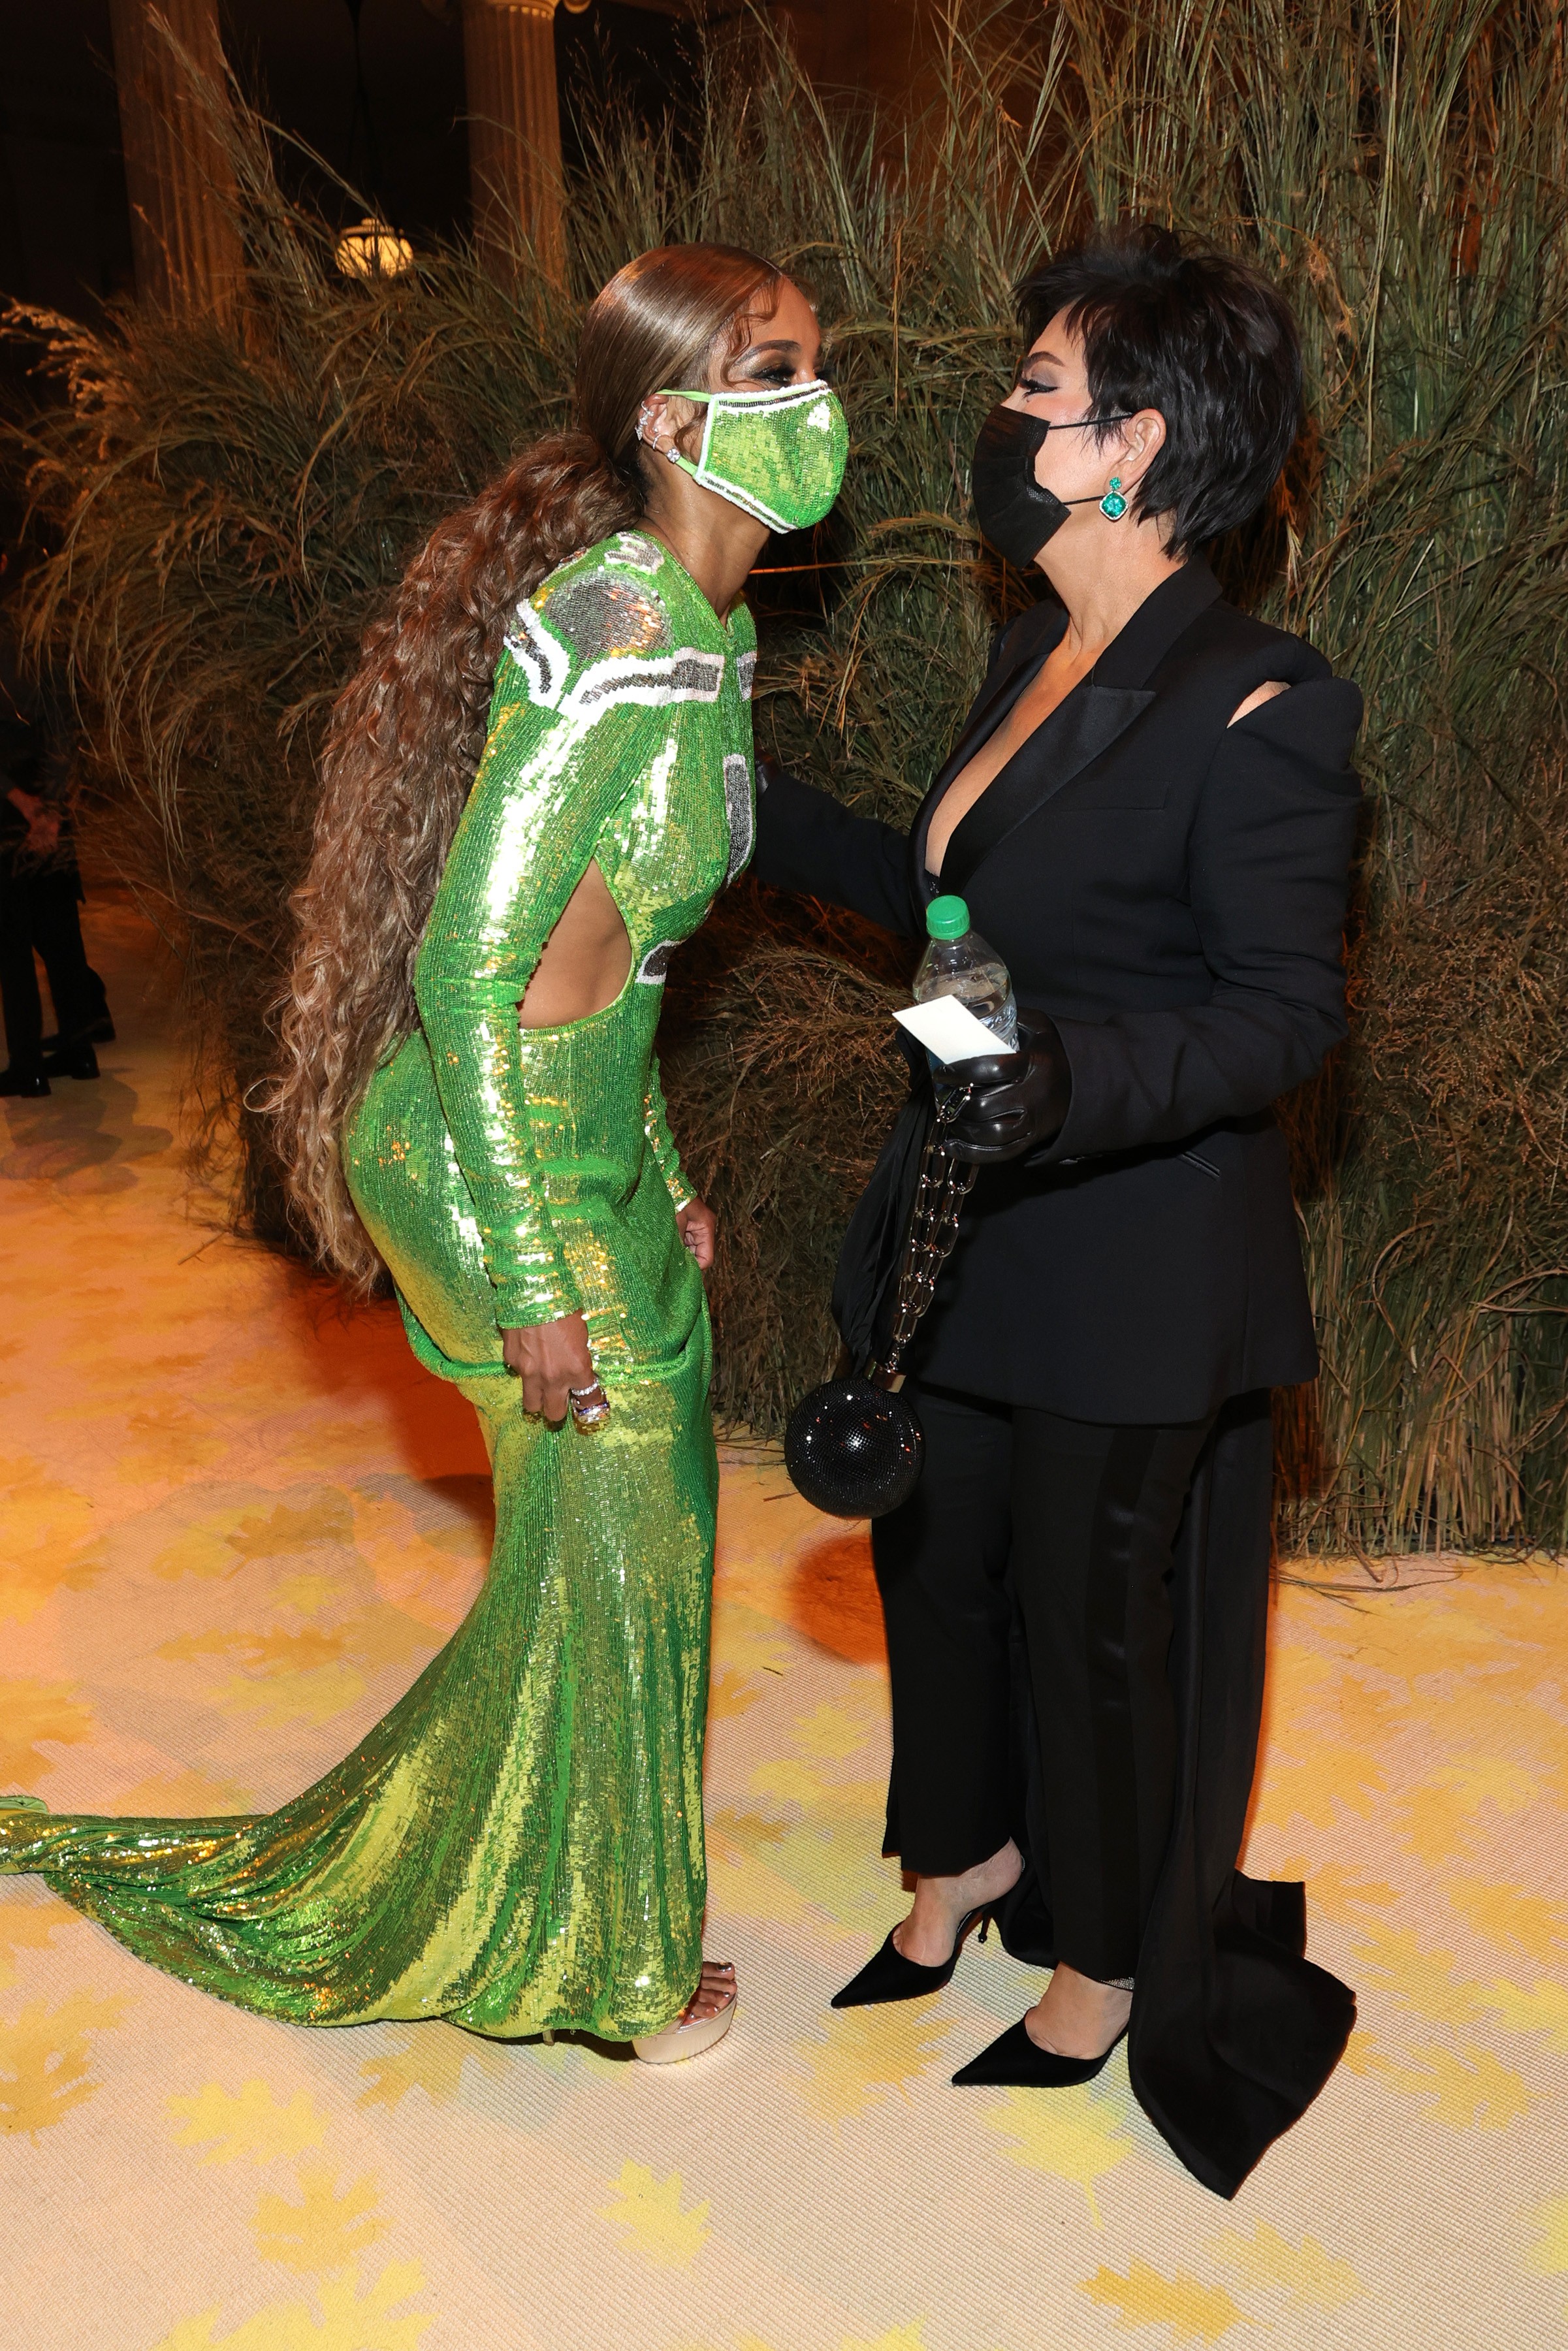 NEW YORK, NEW YORK - SEPTEMBER 13: (EXCLUSIVE COVERAGE) Ciara and Kris Jenner attend the The 2021 Met Gala Celebrating In America: A Lexicon Of Fashion at Metropolitan Museum of Art on September 13, 2021 in New York City. (Photo by Jamie McCarthy/MG21/Get (Foto: Getty Images for The Met Museum/)